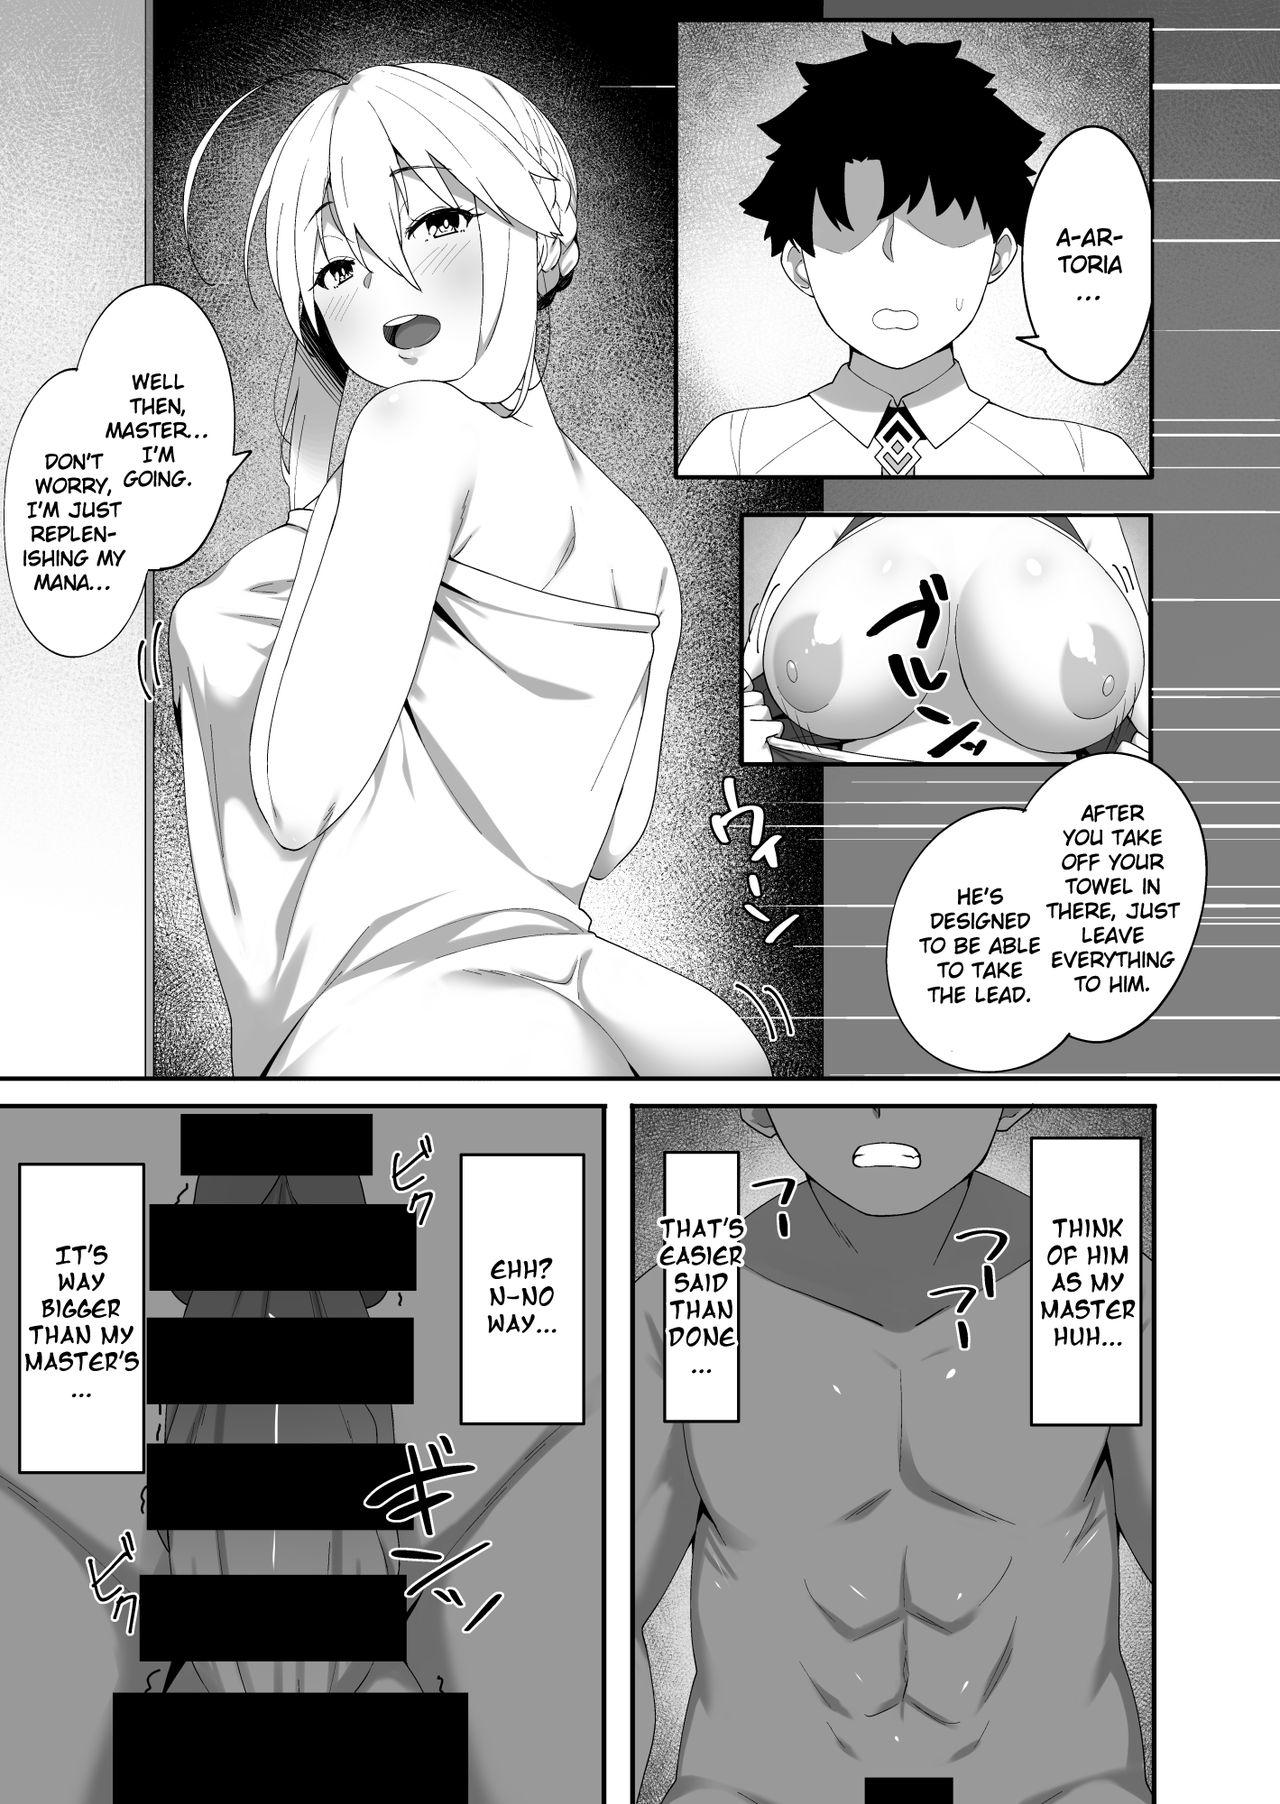 Hand Kabe no Mukou de Kimi ga Naku 2 | Crying Out From The Other Side Of The Wall 2 - Fate grand order Semen - Page 4